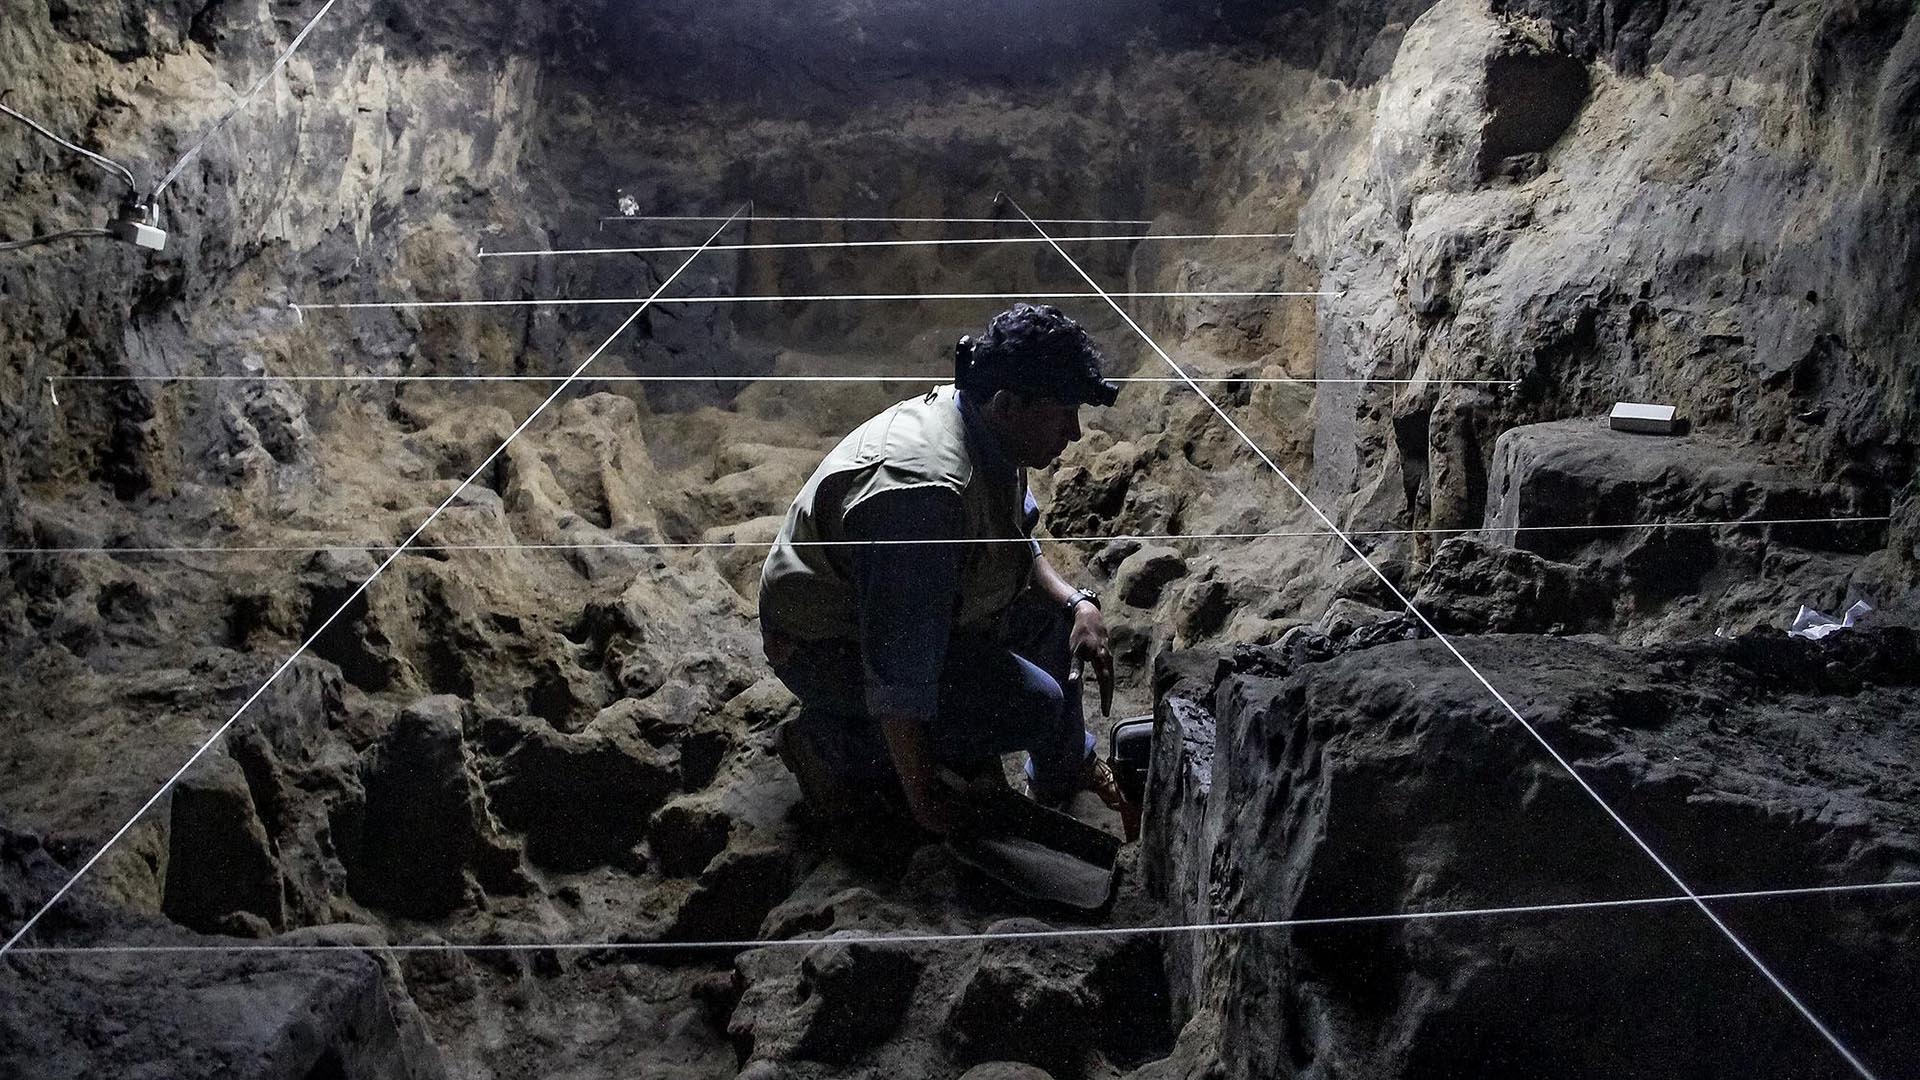 An archaeologist sits and analyzes rocks in a cave.